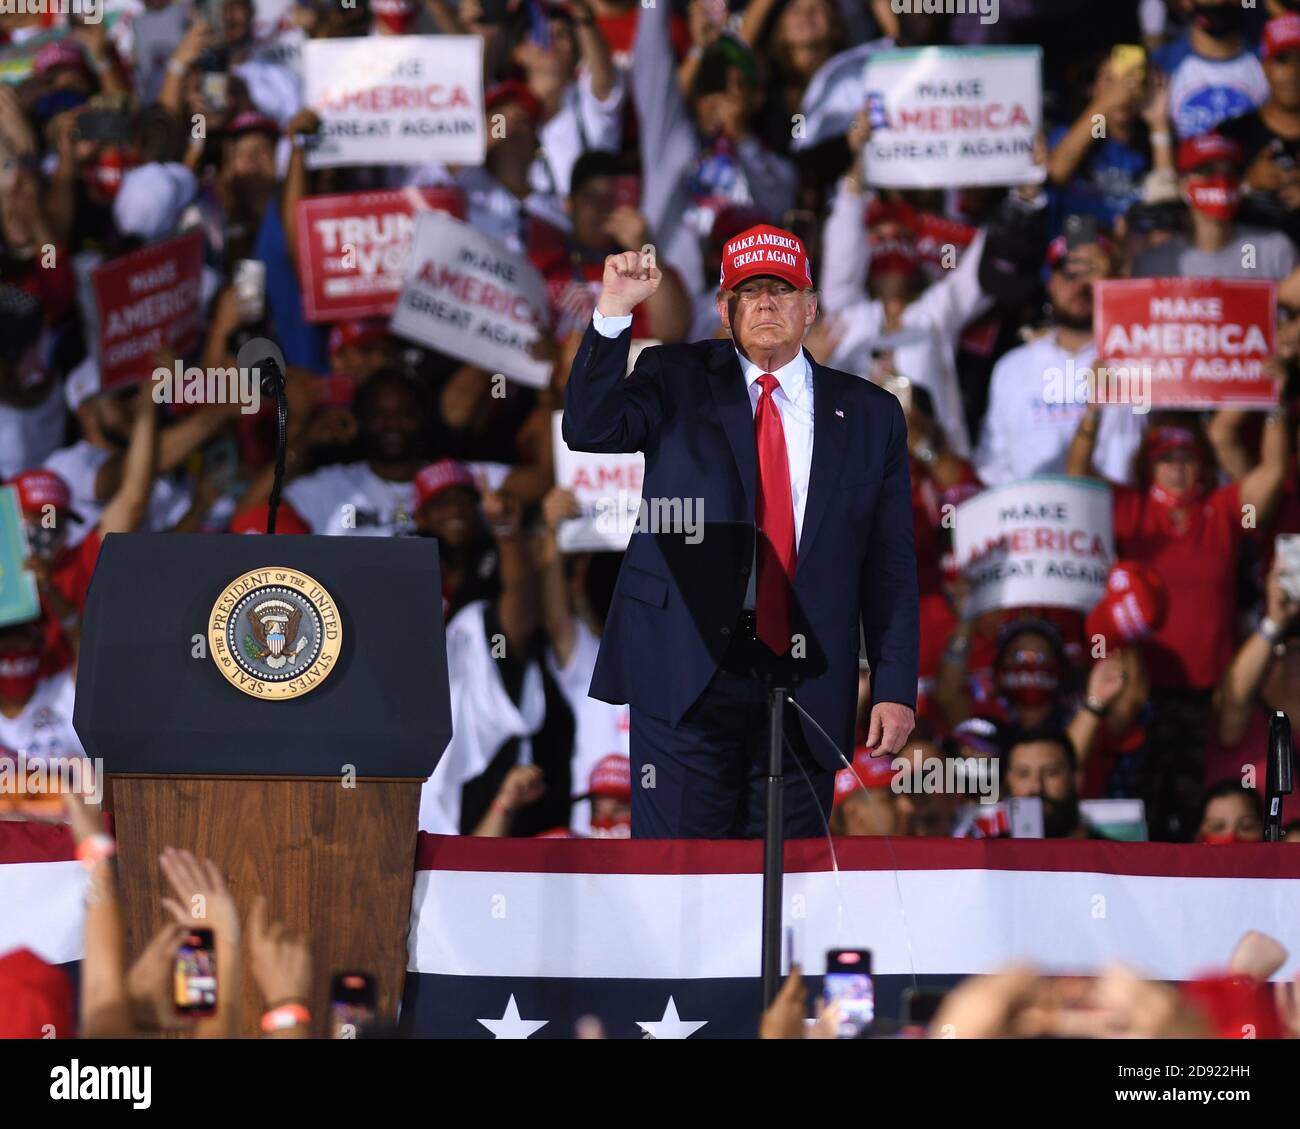 Opa Locka, United States. 01st Nov, 2020. November 1, 2020 - Opa-Locka, Florida, United States - U.S. President Donald Trump gestures to the crowd as he prepares to depart after speaking at a campaign rally at Miami-Opa Locka Executive Airport on November 1, 2020 in Opa-Locka, Florida. President Trump held events in five states today, as he continues his campaign against Democratic presidential nominee Joe Biden two days before the November 3 election. Credit: Paul Hennessy/Alamy Live News Stock Photo